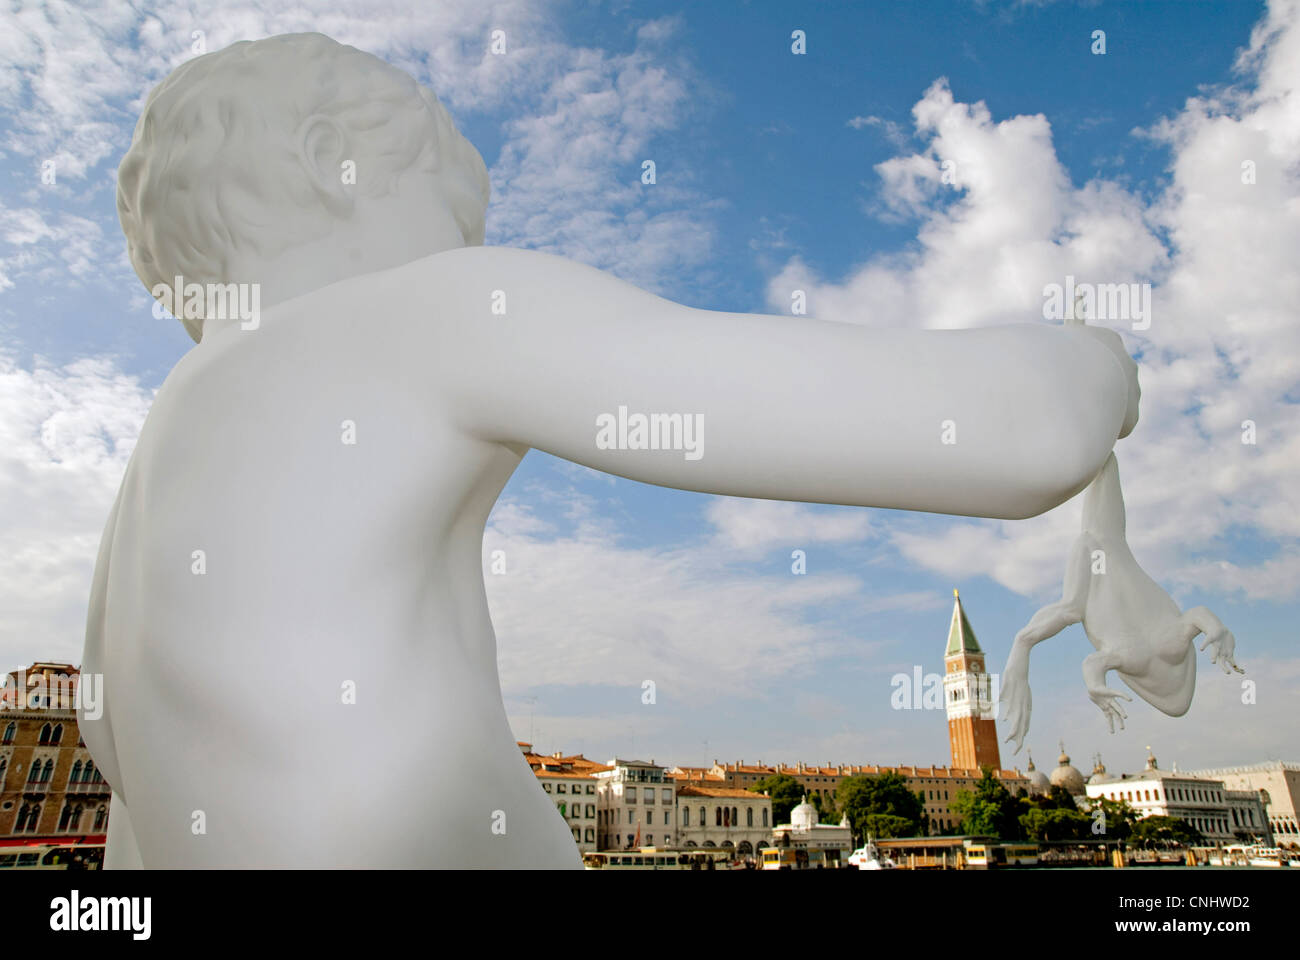 Boy with Frog, sculpture by Charles Ray, Punta della Dogana, Venice, Italy, Europe Stock Photo